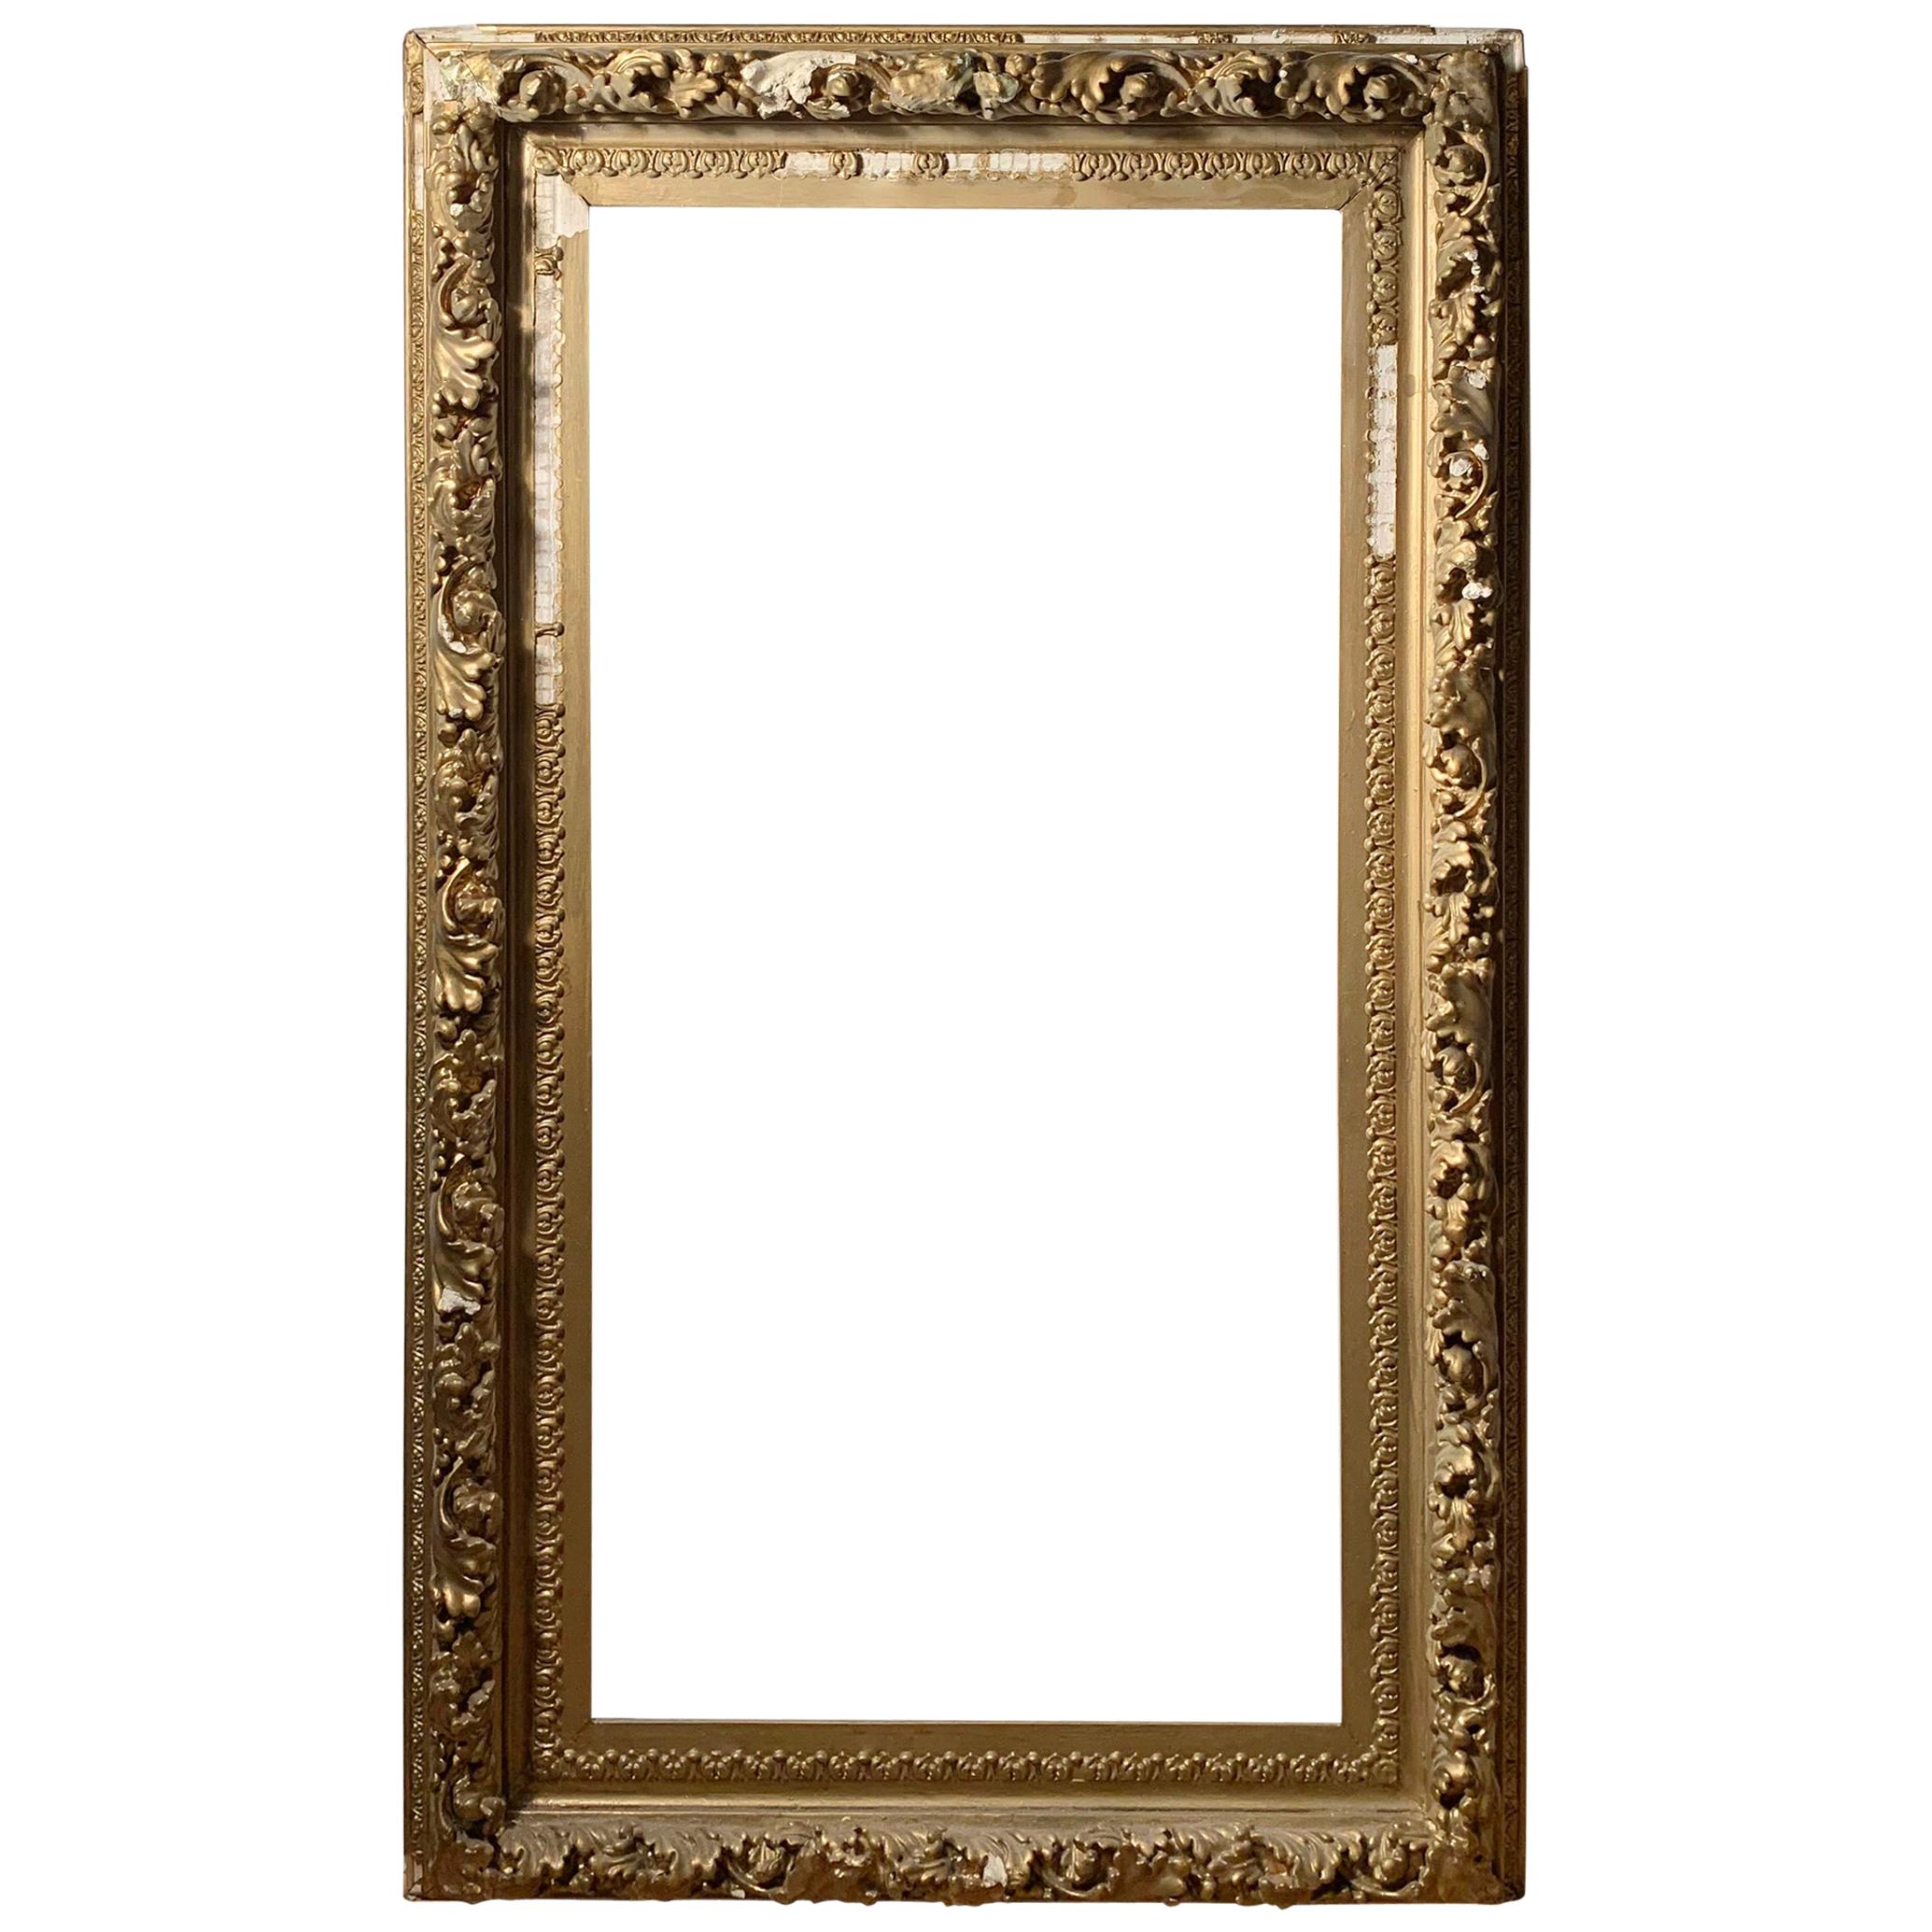 Large Early Antique Gilt / Gilded French Mirror / Art Frame